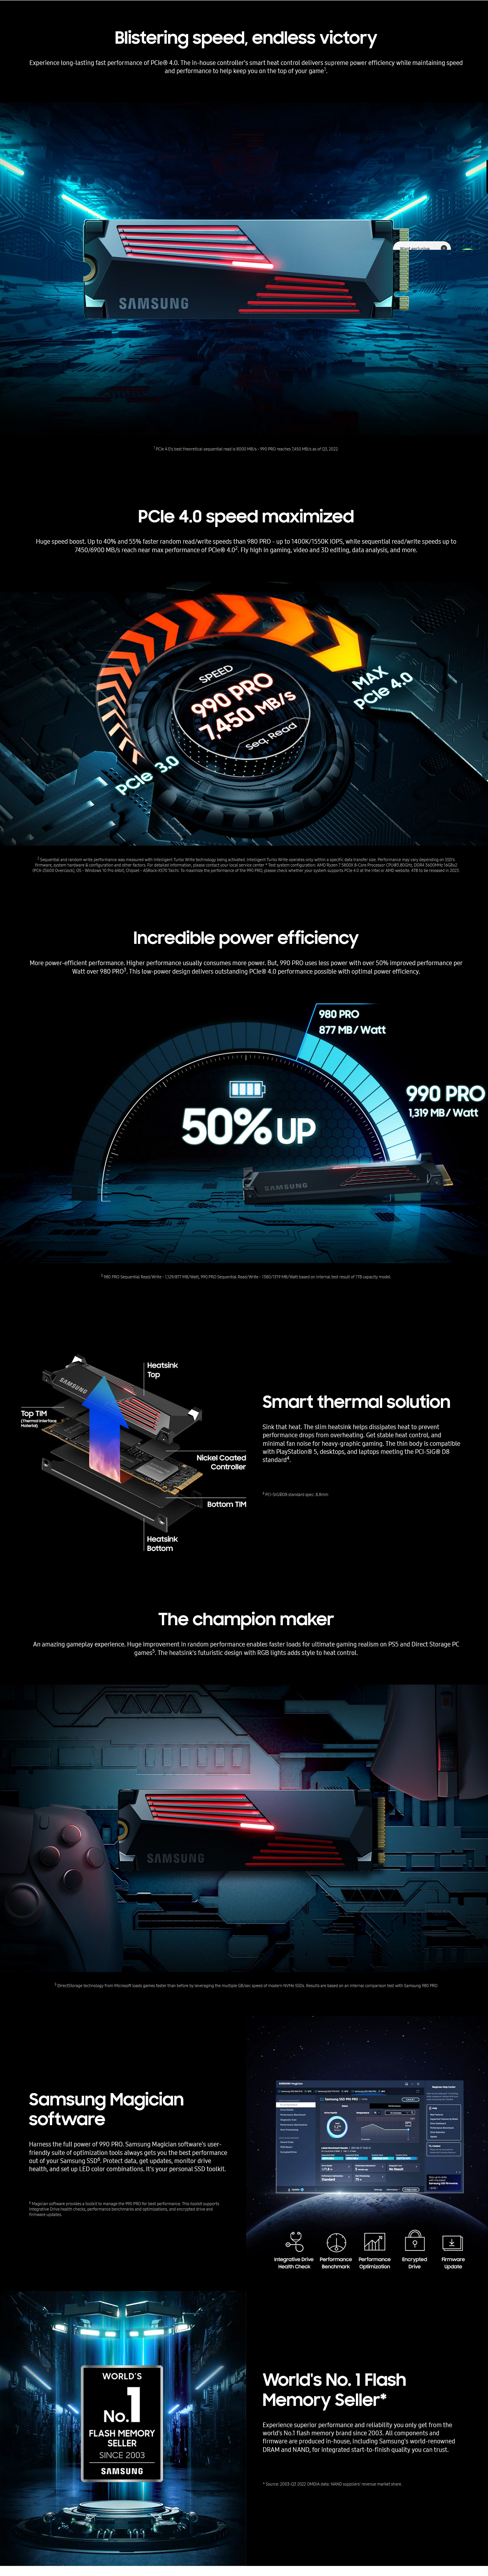 A large marketing image providing additional information about the product Samsung 990 Pro w/ Heatsink PCIe Gen4 NVMe M.2 SSD - 4TB - Additional alt info not provided